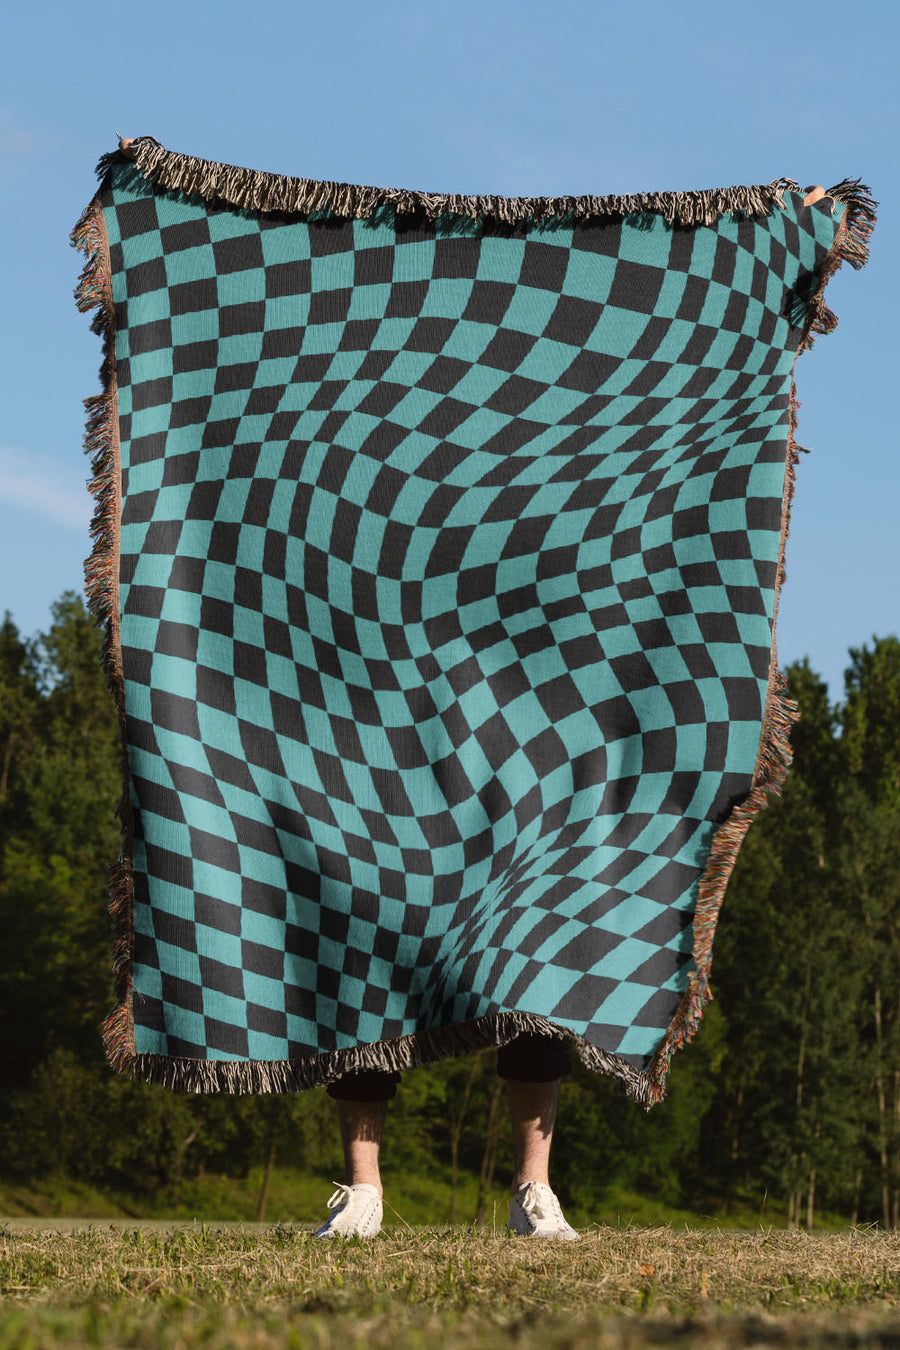 Trippy Checkers Black and Blue Cotton Woven Throw Blanket with a psychedelic checker pattern and fringe edges.